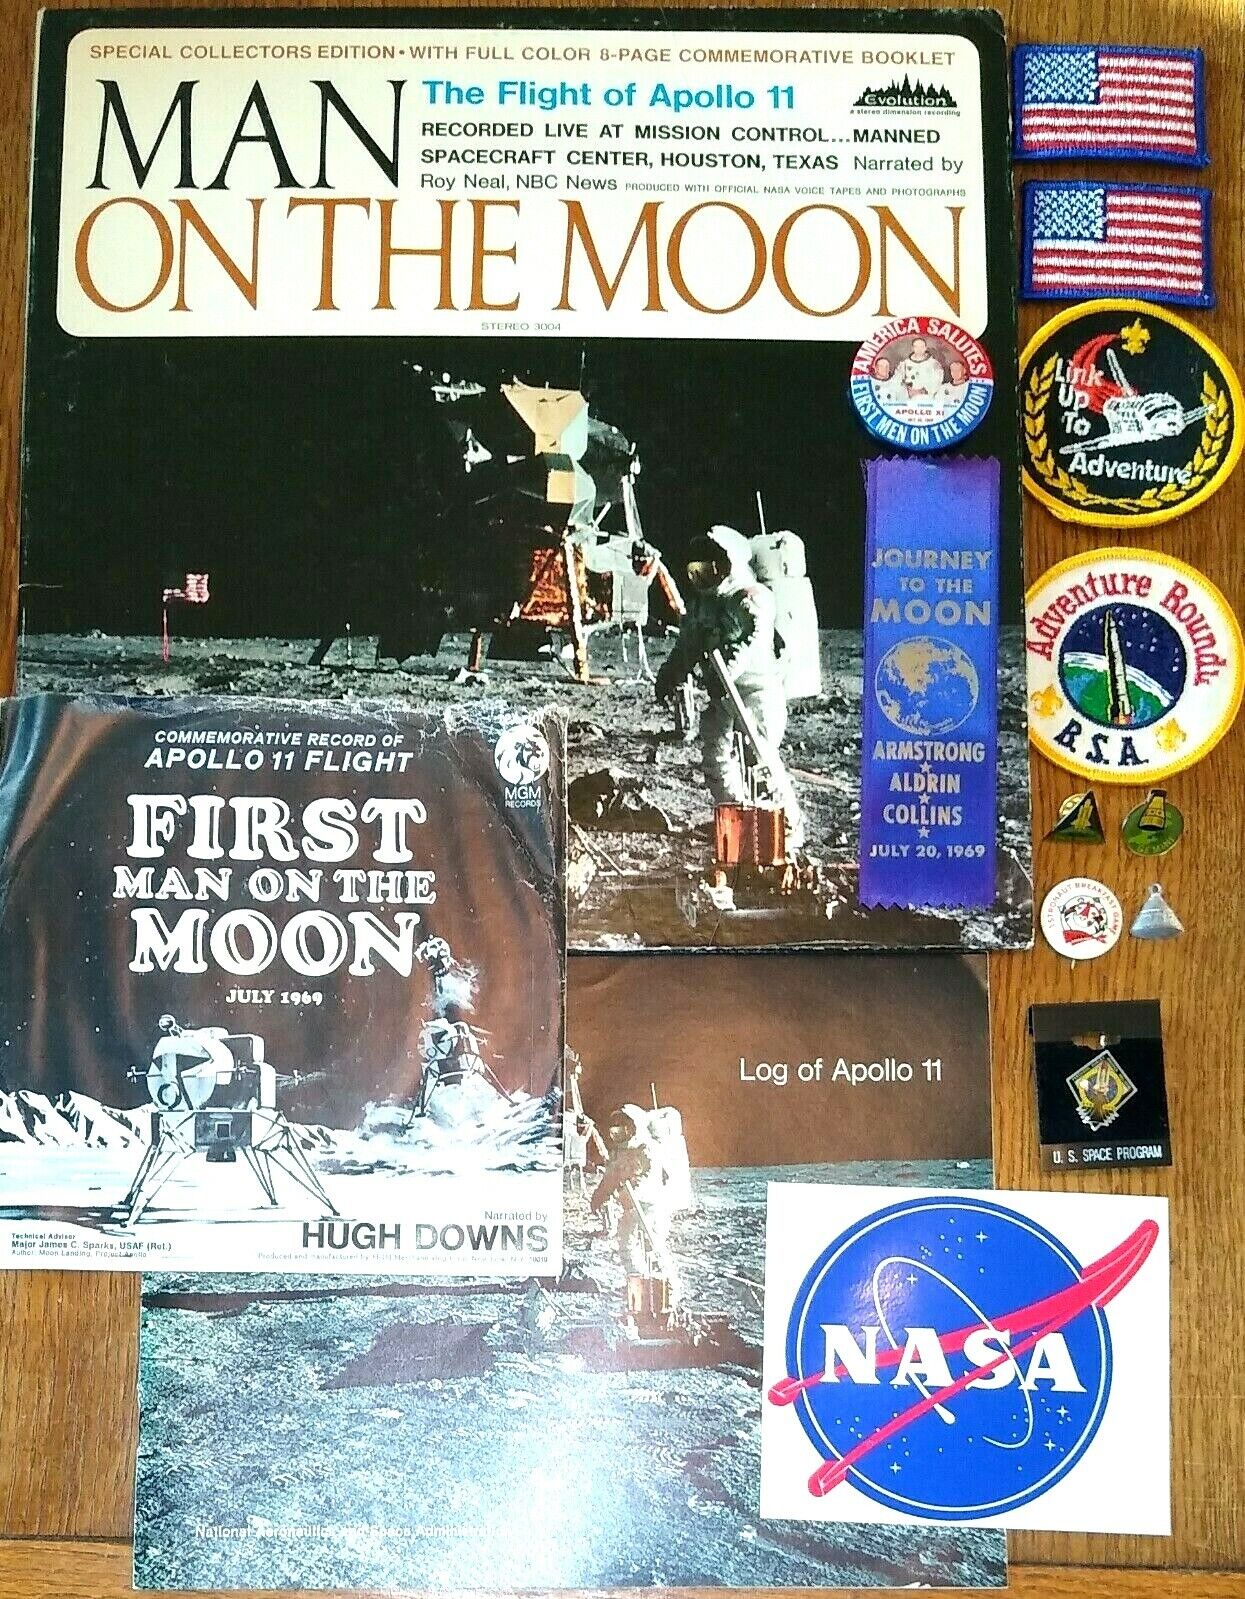 Collection of Vintage NASA Artifacts ~Books Records Pinbacks Patches Sticker etc